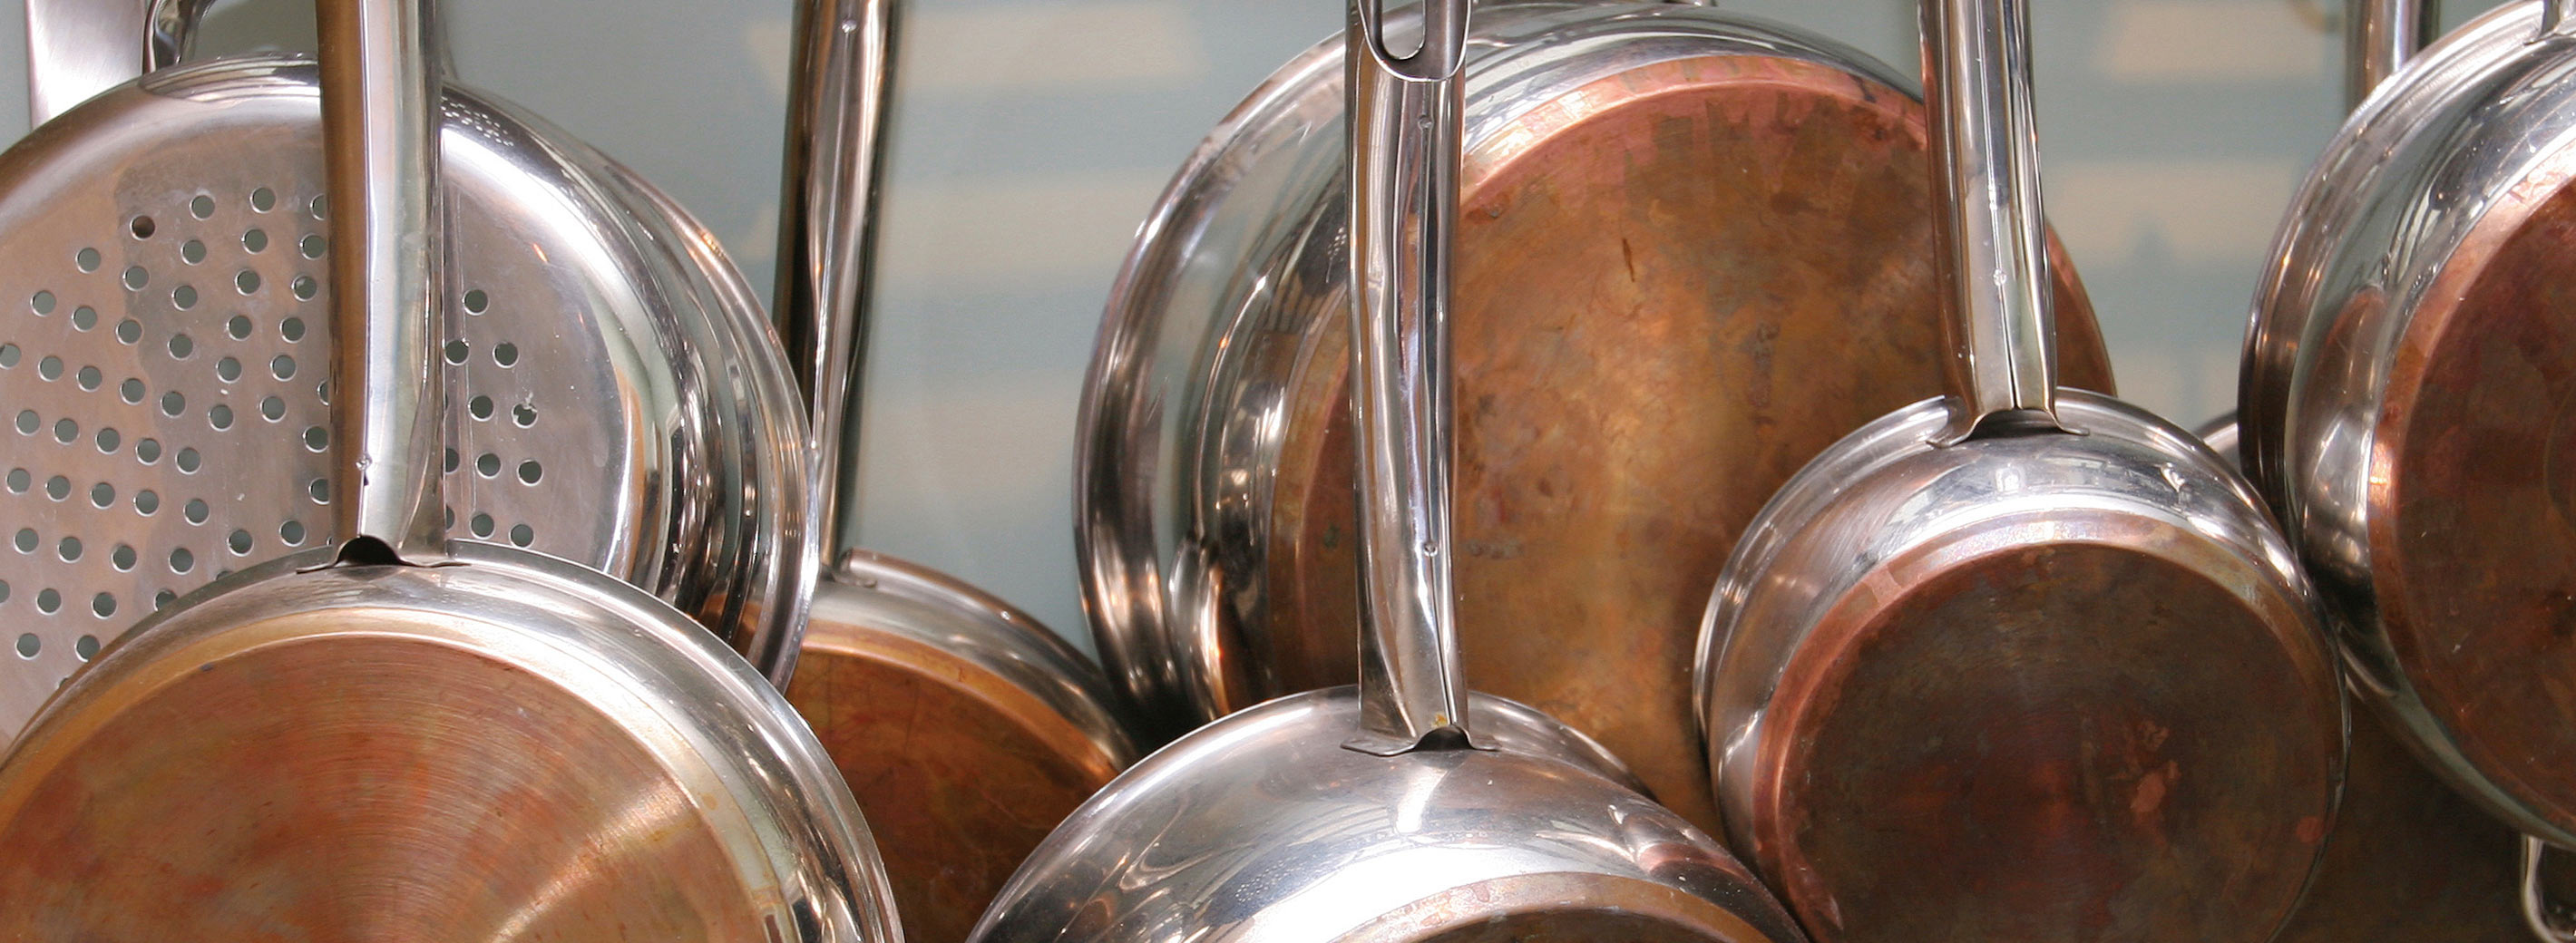 Copper pots and pans hanging